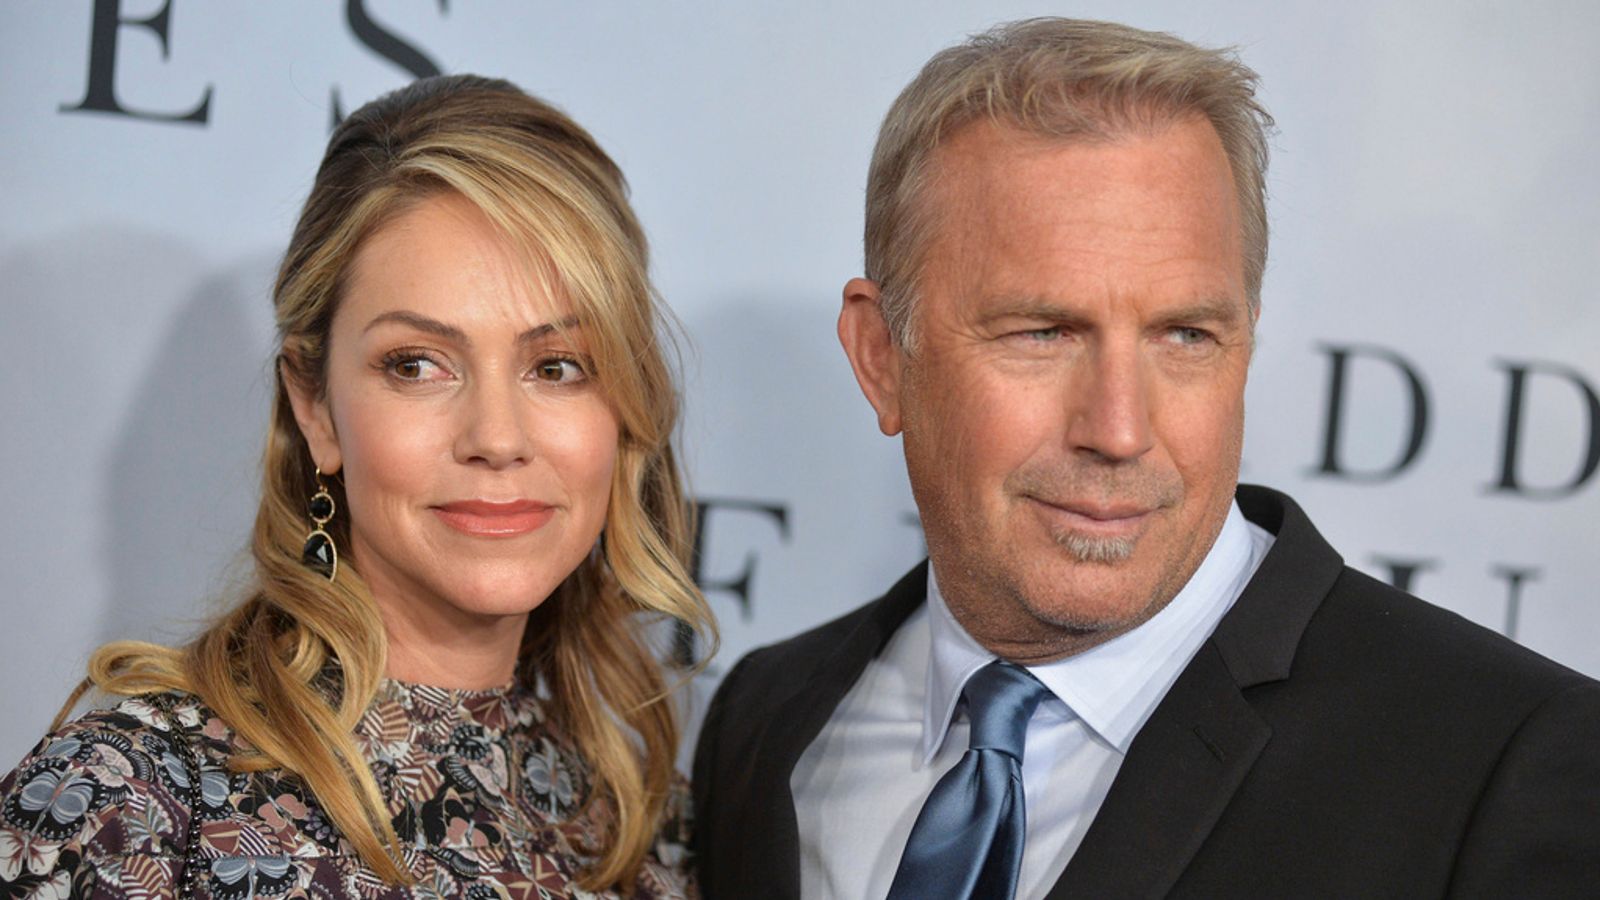 Kevin Costner and wife of nearly 19 years Christine Baumgartner to divorce